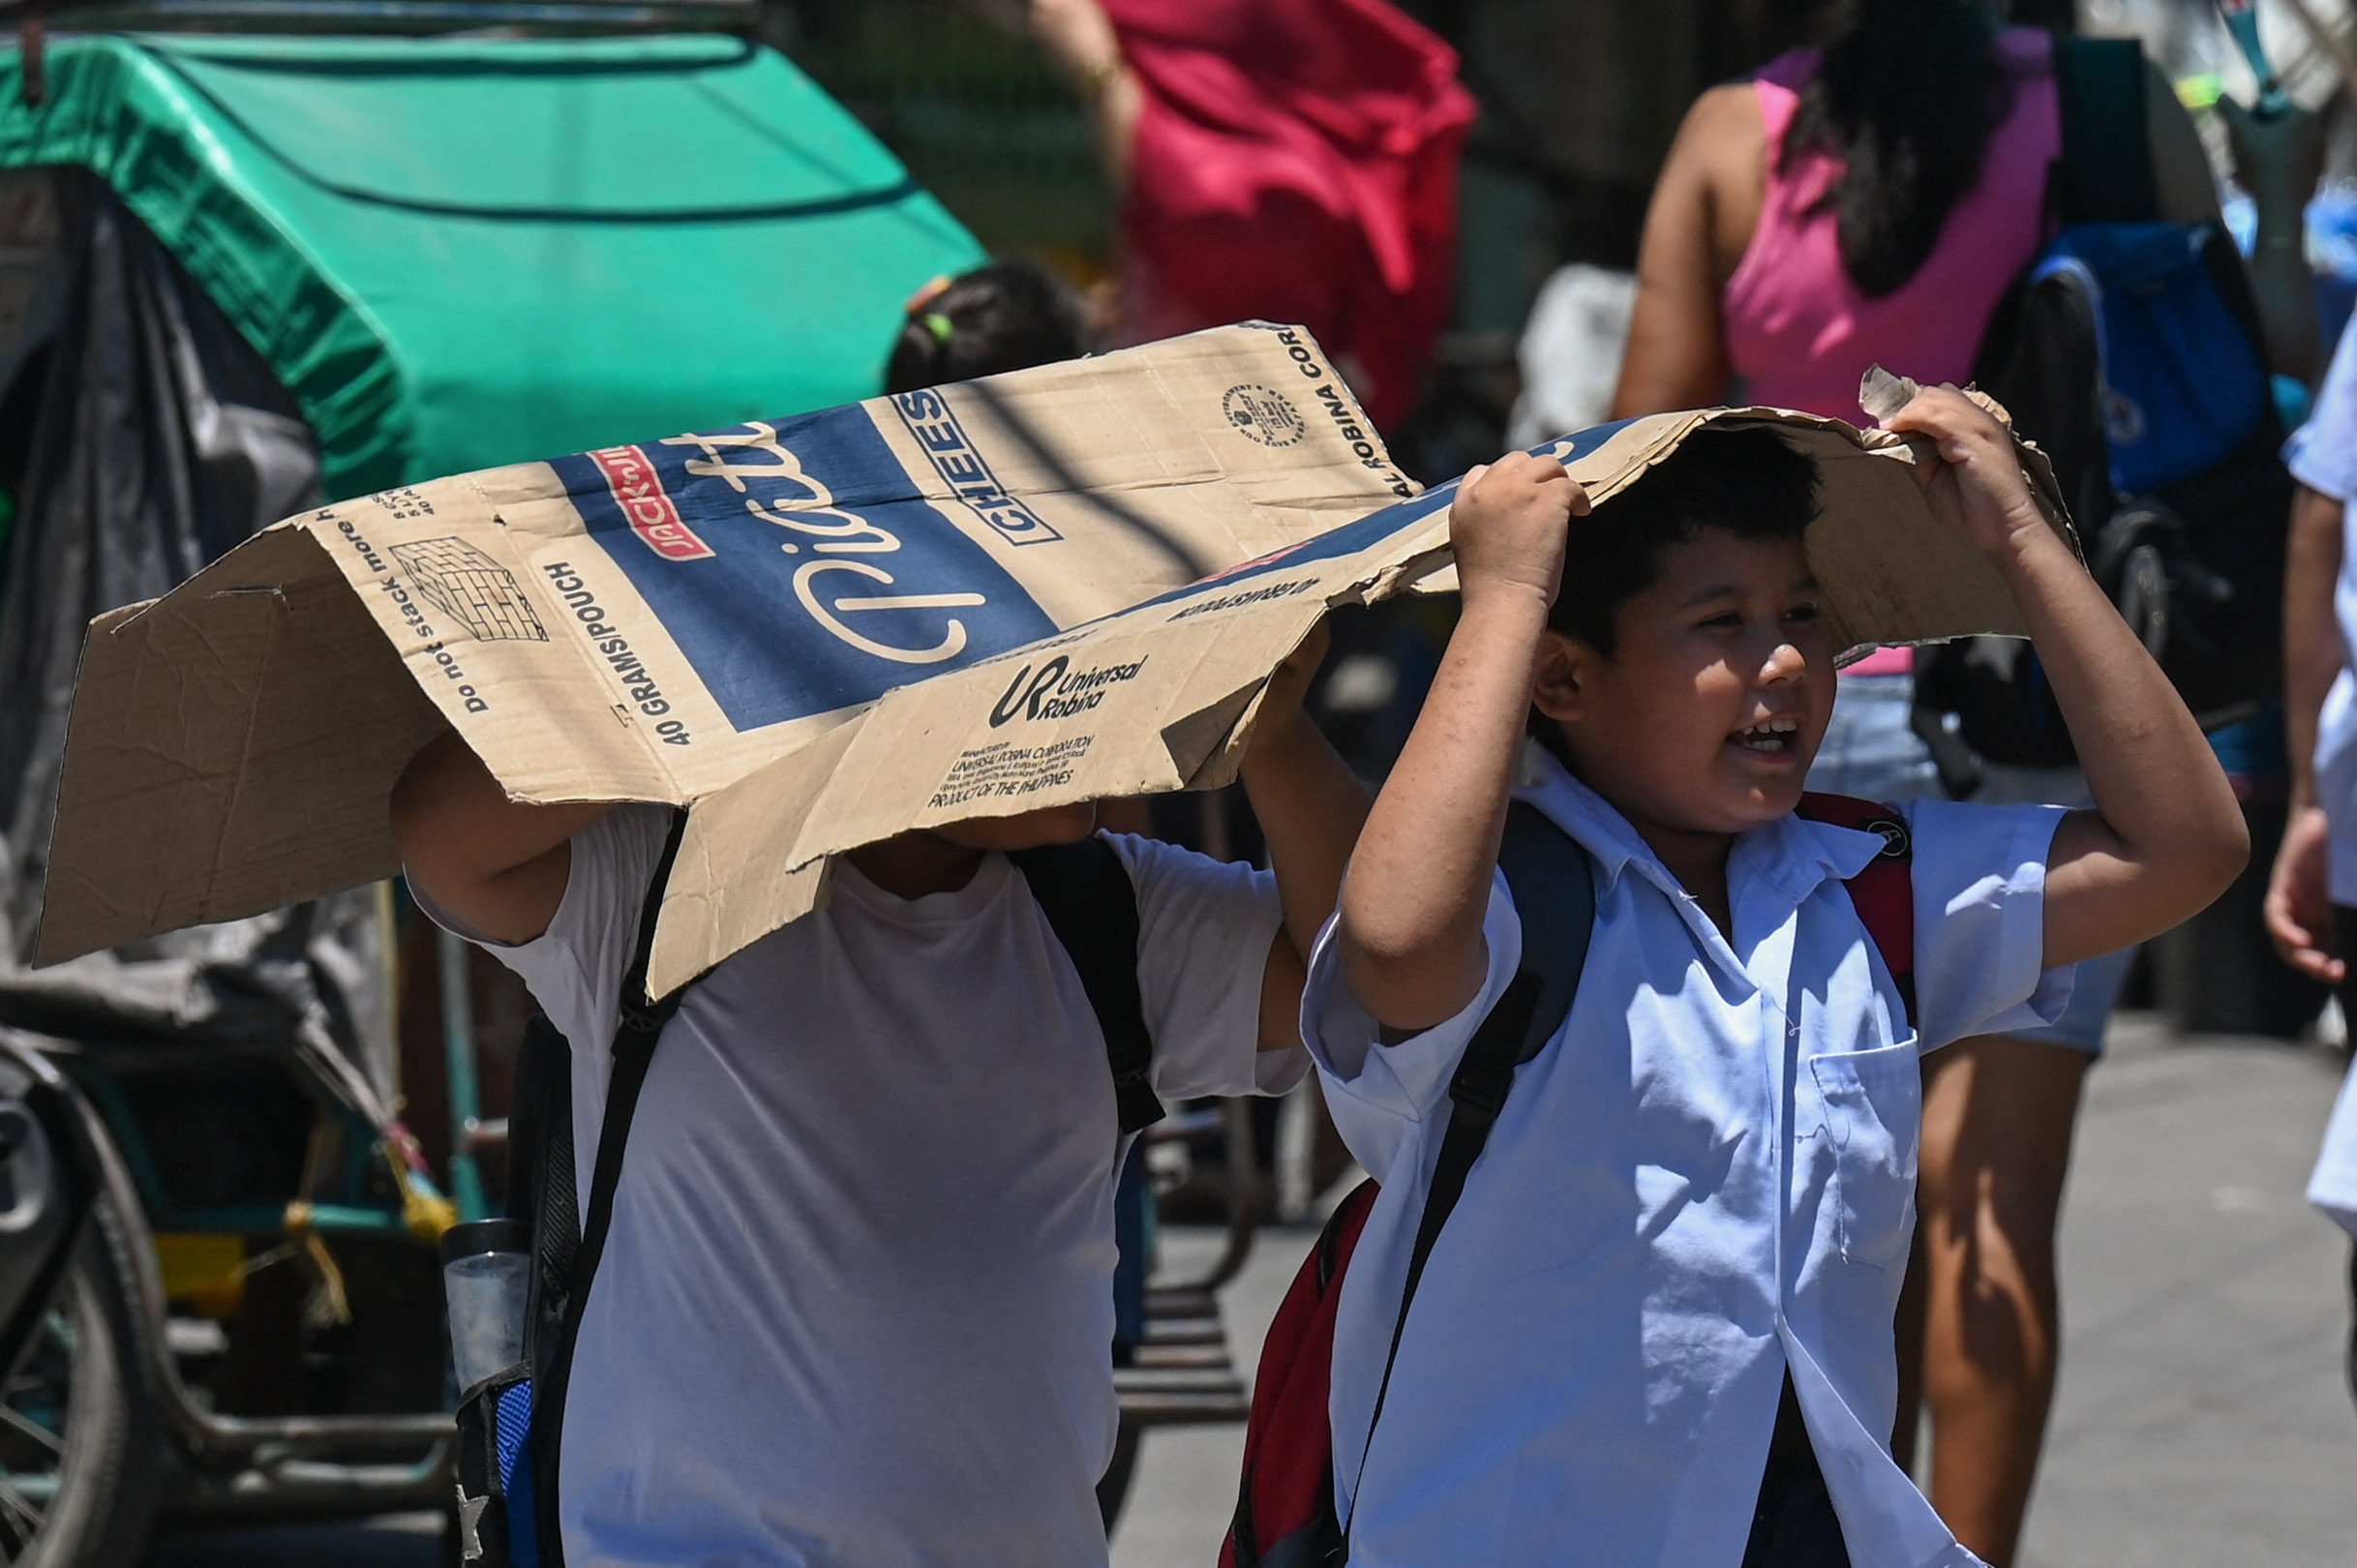 Students use a cardboard to protect themselves from the sun during a hot day in Manila on Tuesday. More than a hundred schools in the Philippine capital shut their classrooms as the tropical heat hit “danger” levels. Photo: AFP